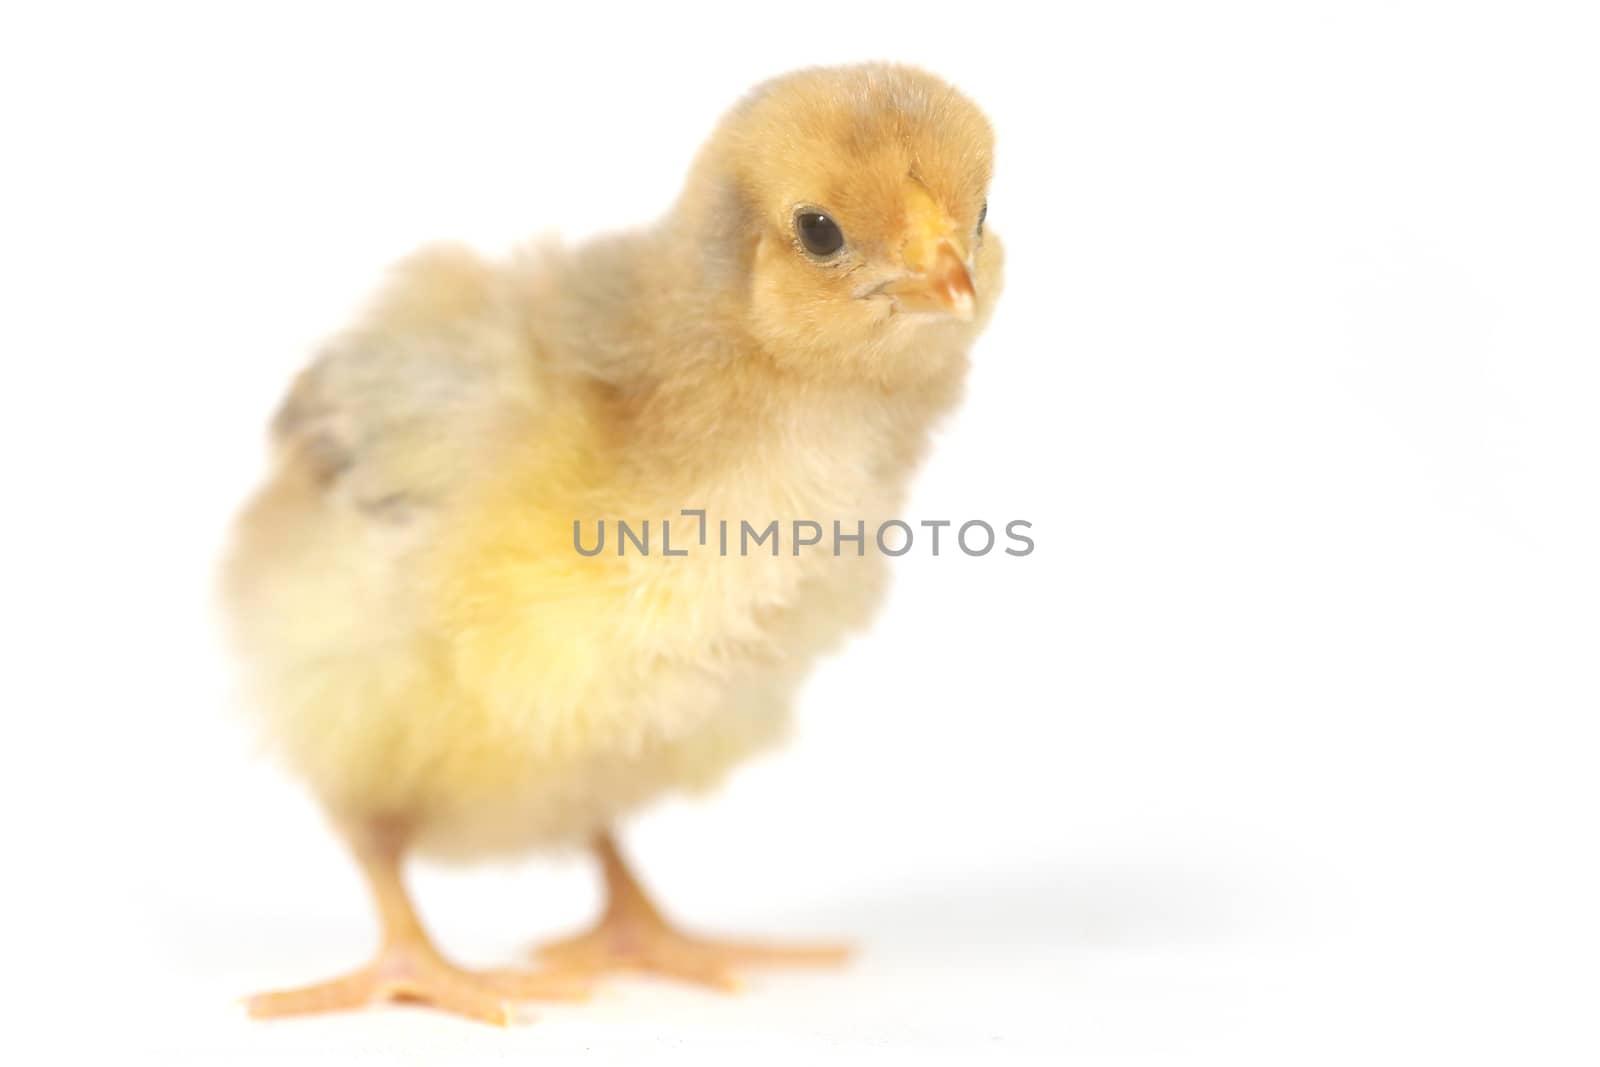 Adorable Baby Chick Chicken on White Background by tobkatrina